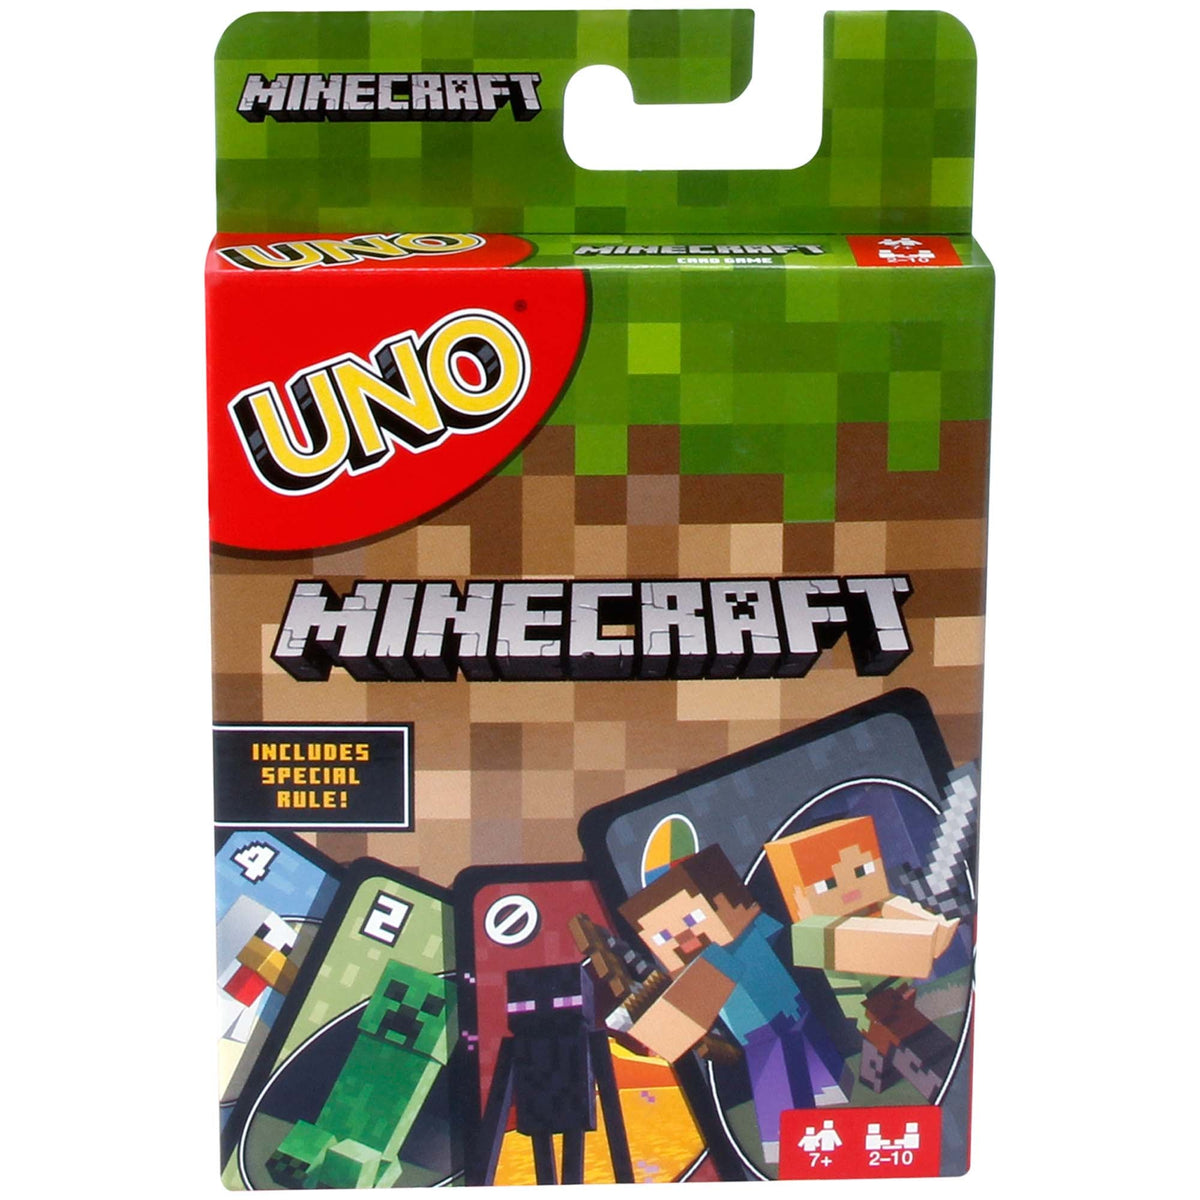 JOUET K.I.D. INC. Toys & Games Minecraft UNO Card Game, 1 Count 887961606782